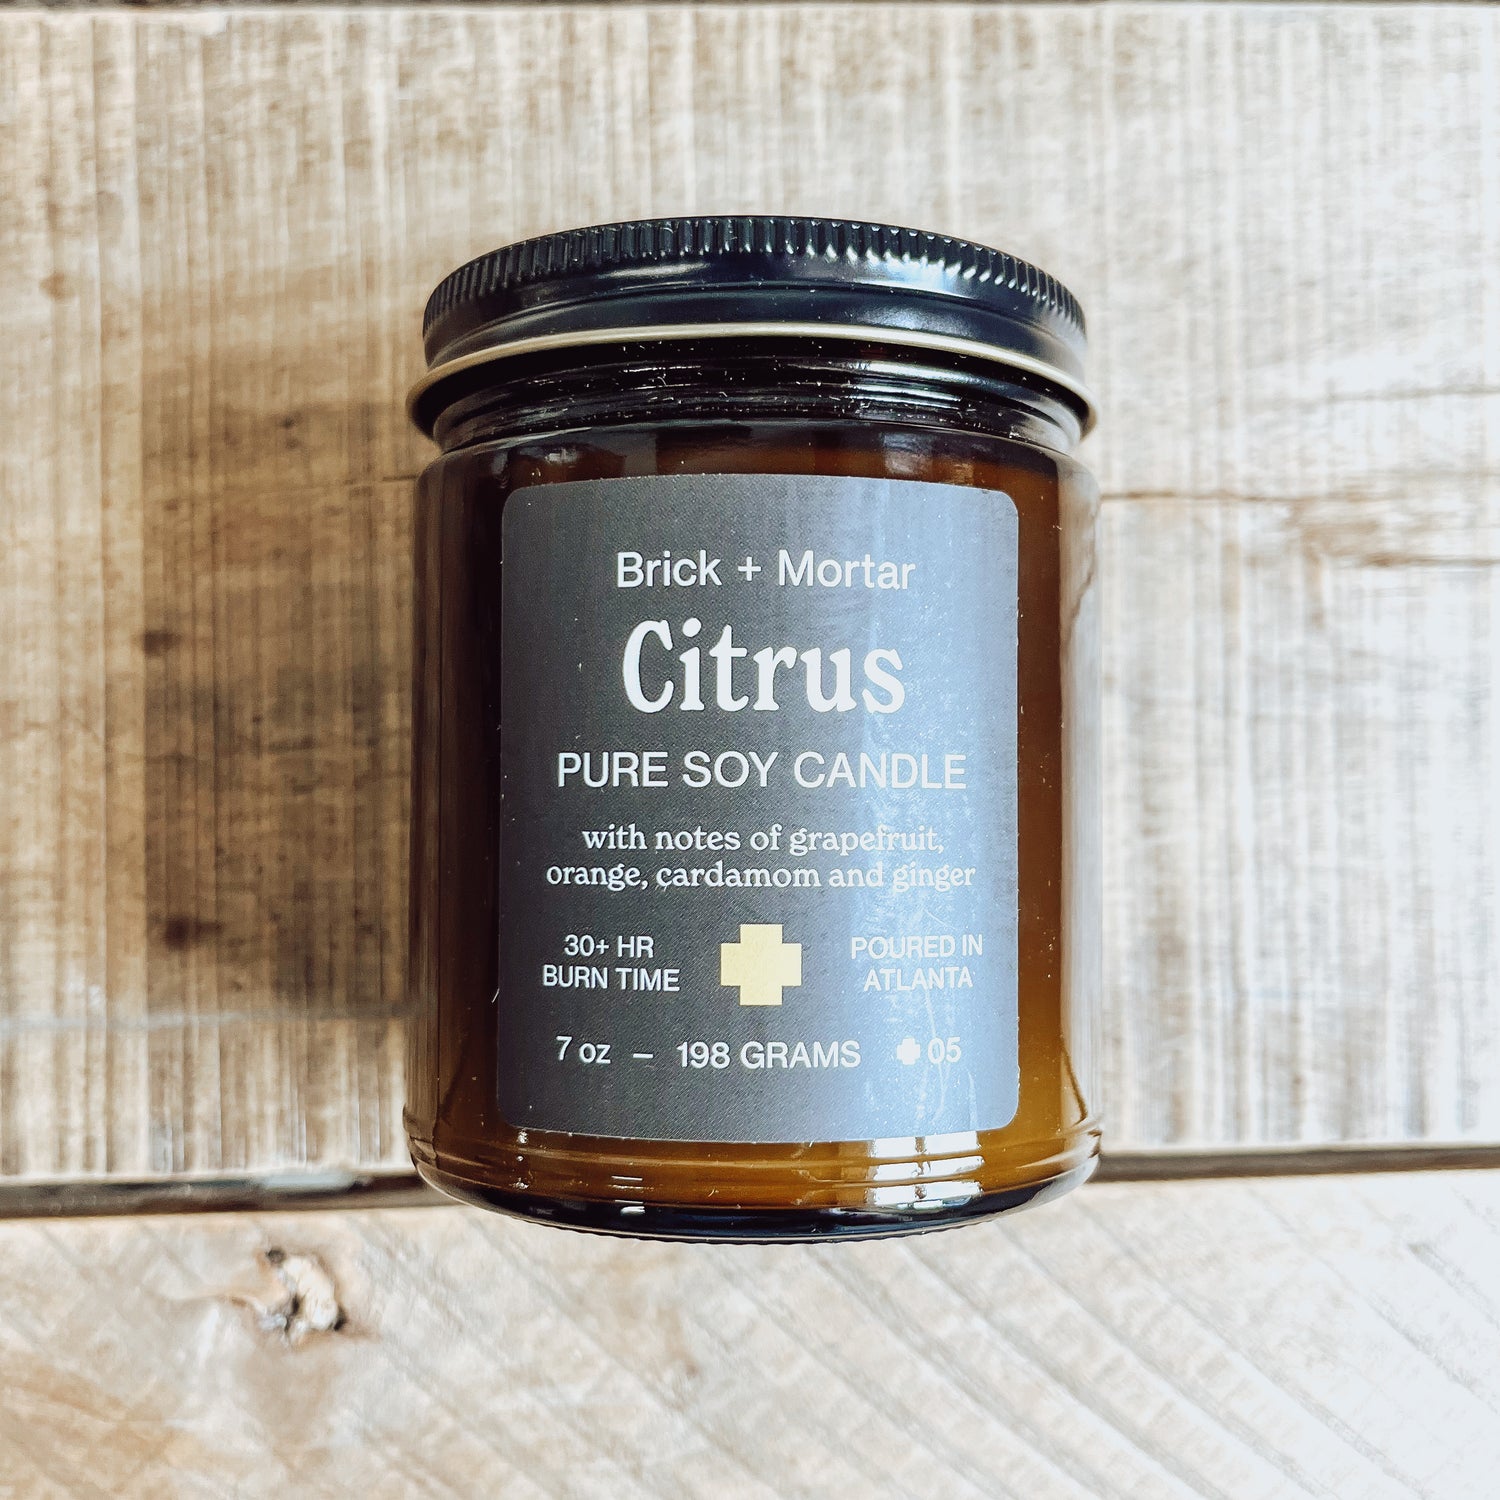 Brick + Mortar Pure soy candle - Citrus Made in GA